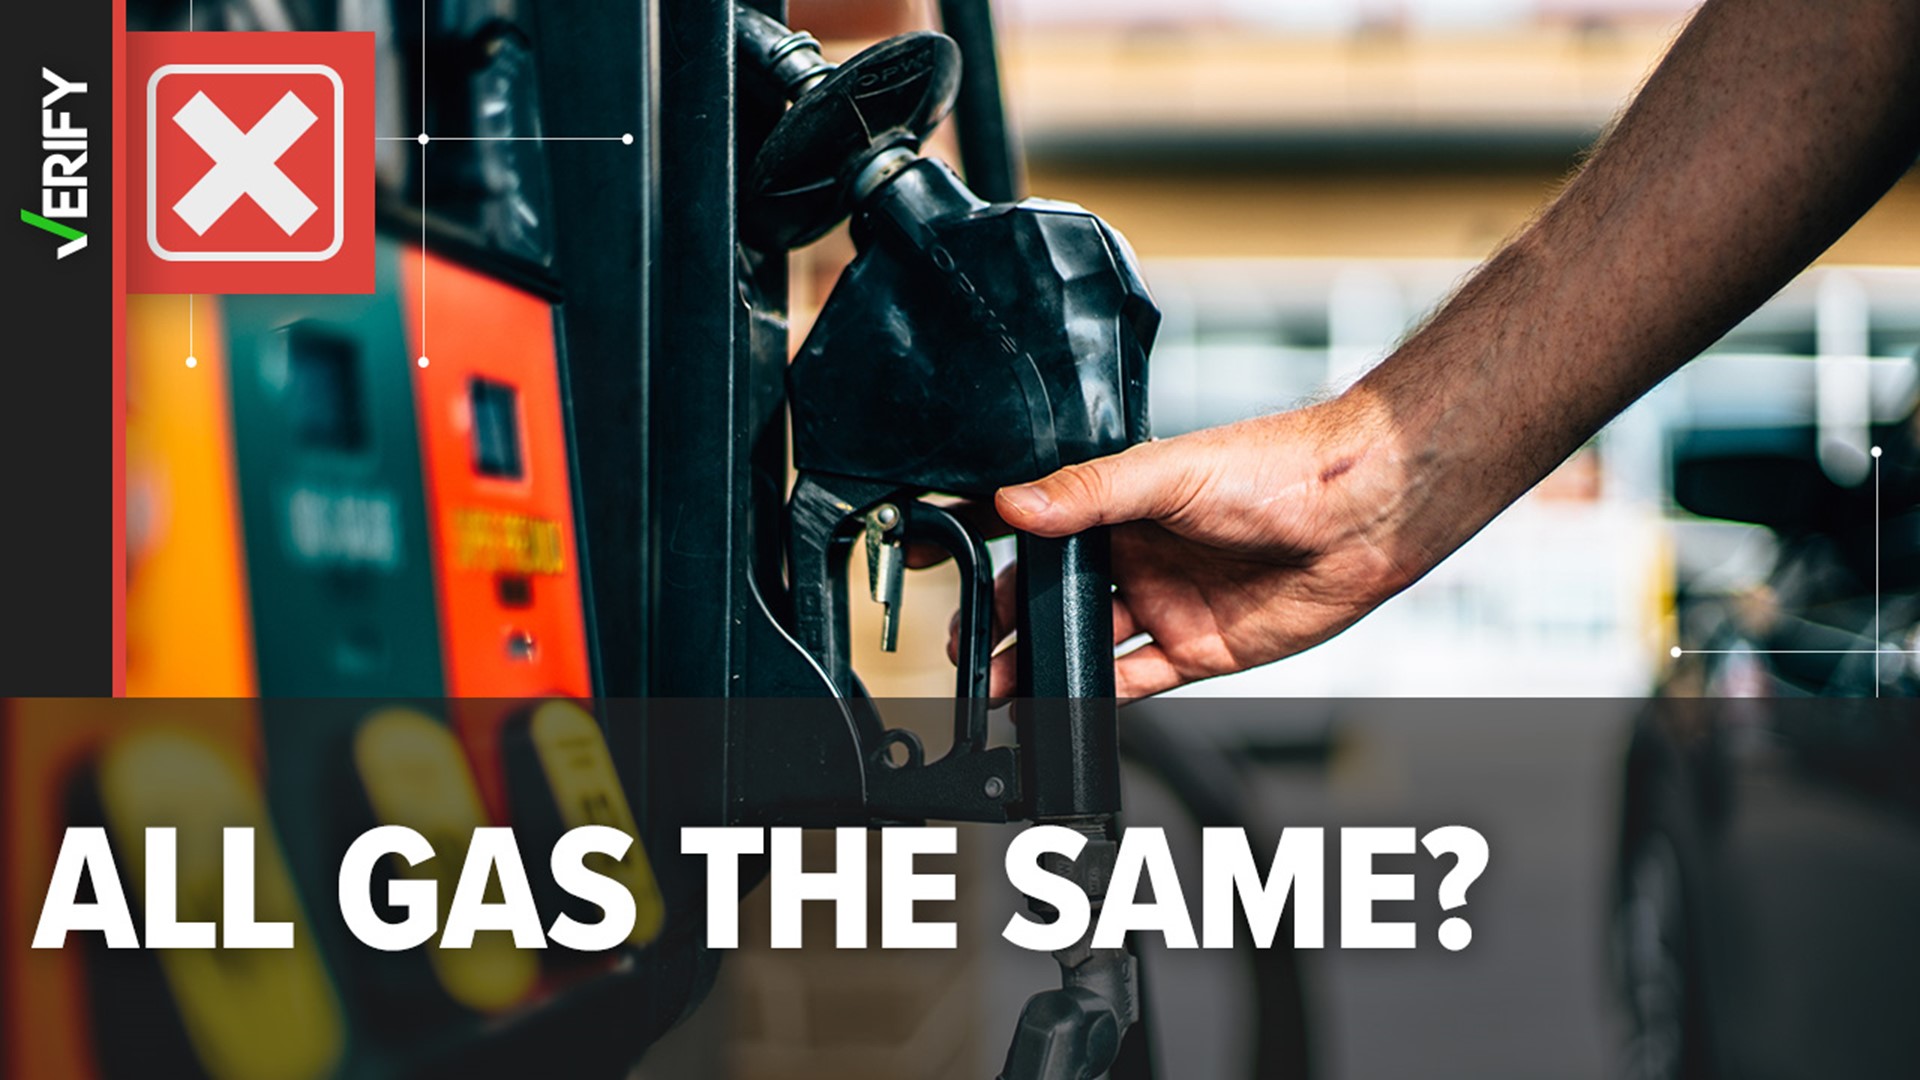 We look into the claim of whether gas stations are all the same.